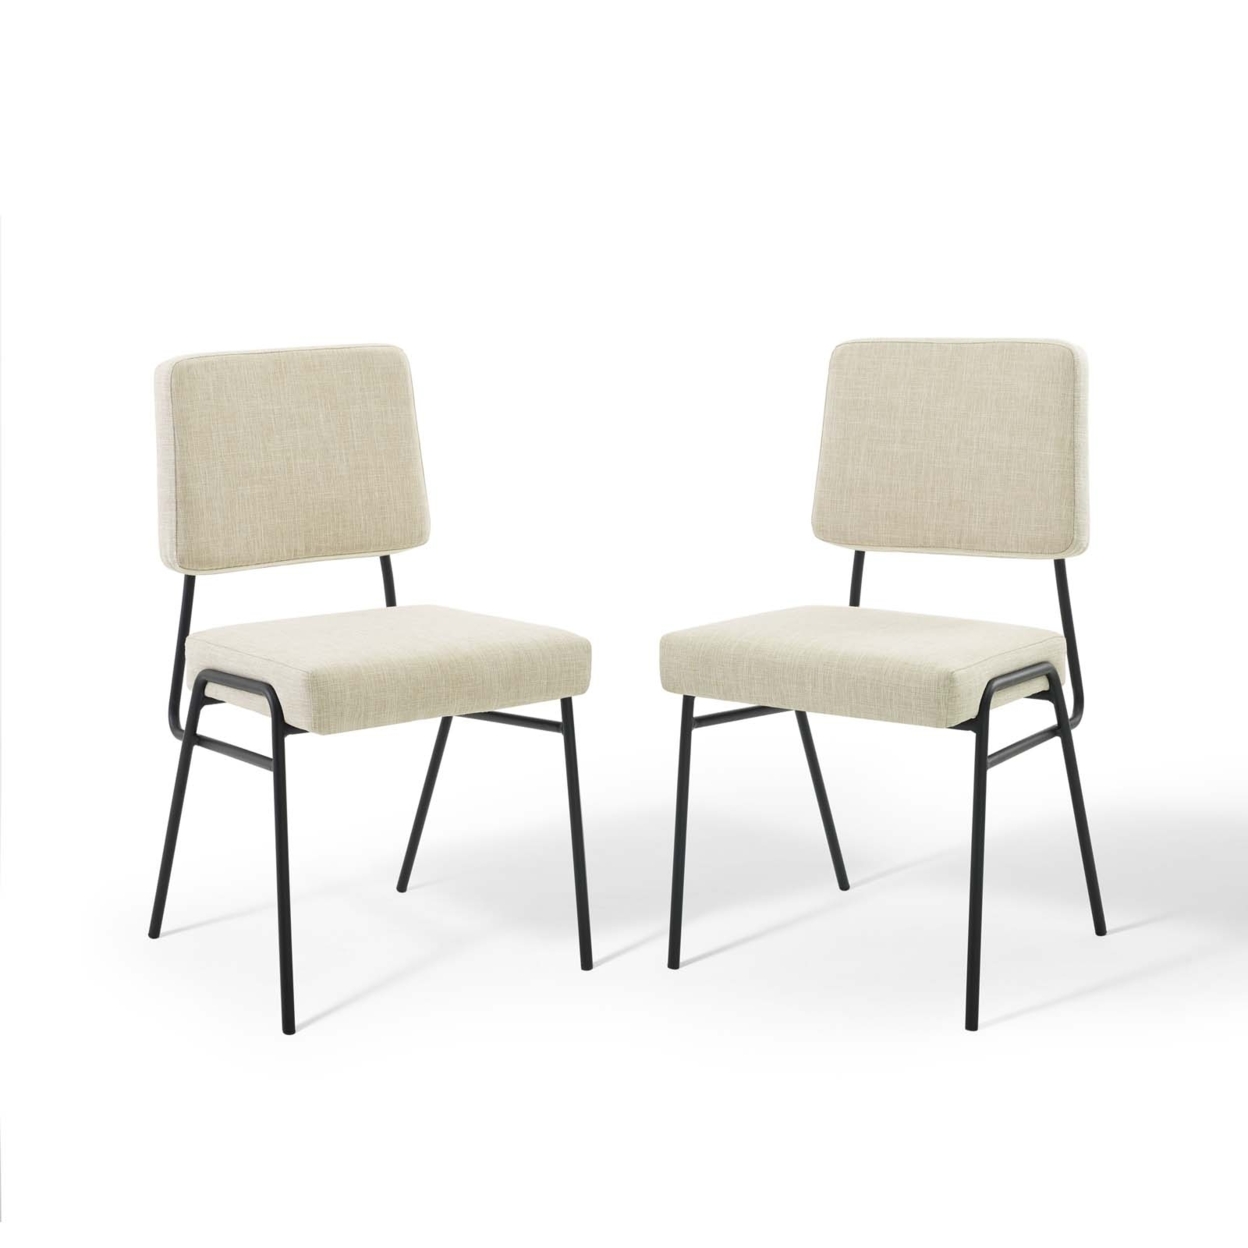 Craft Dining Side Chair Upholstered Fabric Set Of 2, Black Beige